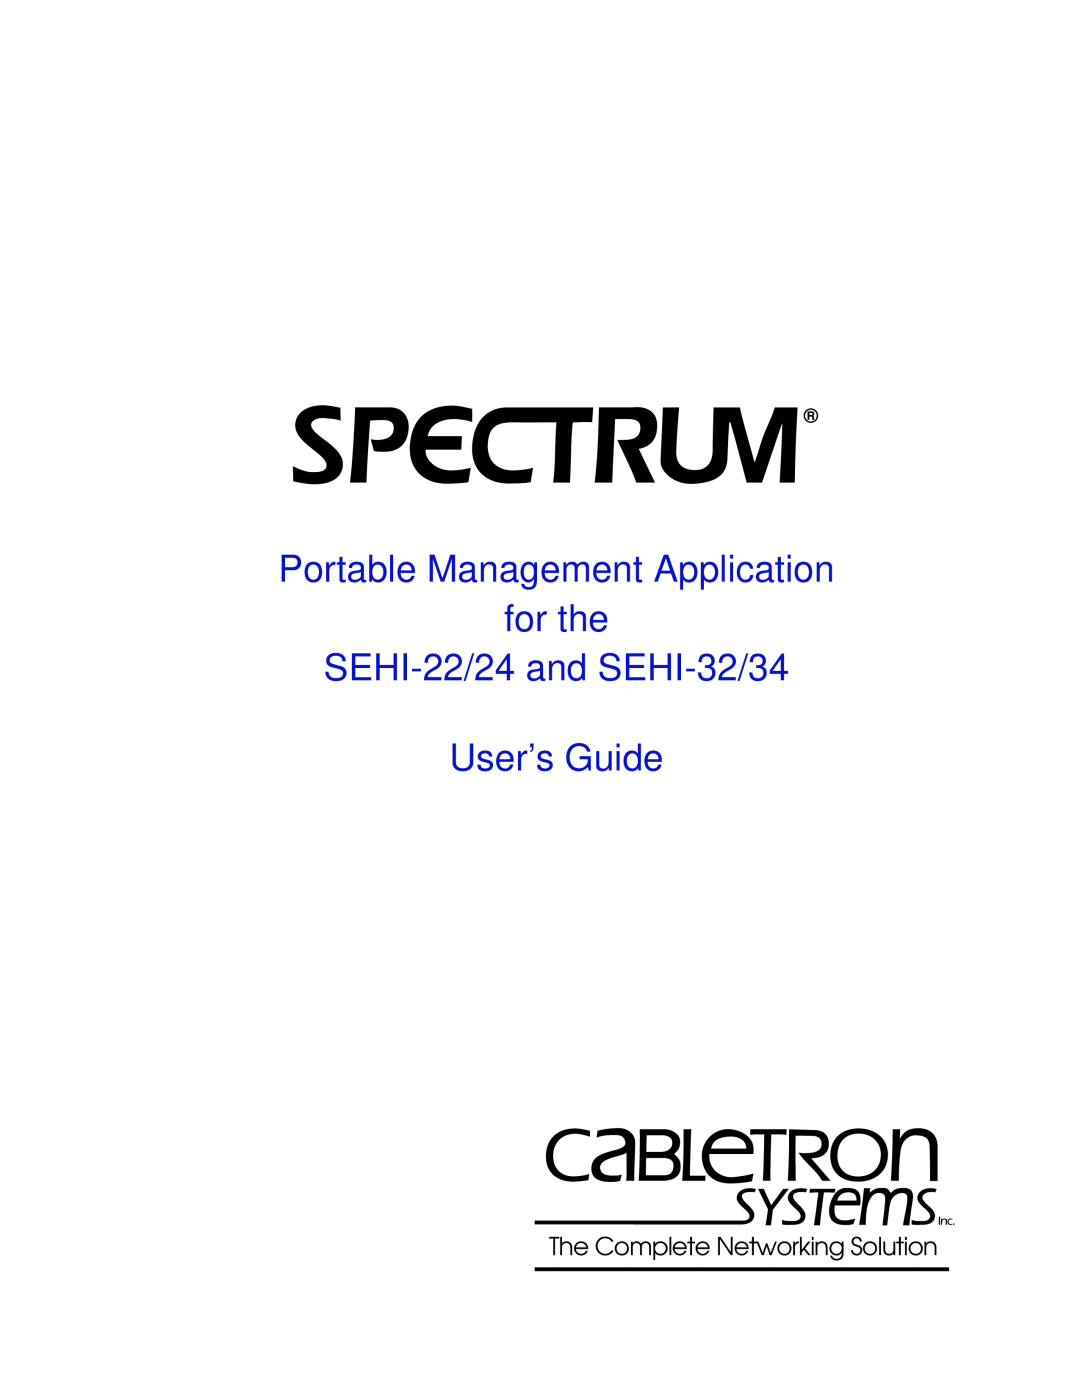 Cabletron Systems manual Portable Management Application for the SEHI-22/24 and SEHI-32/34, User’s Guide 